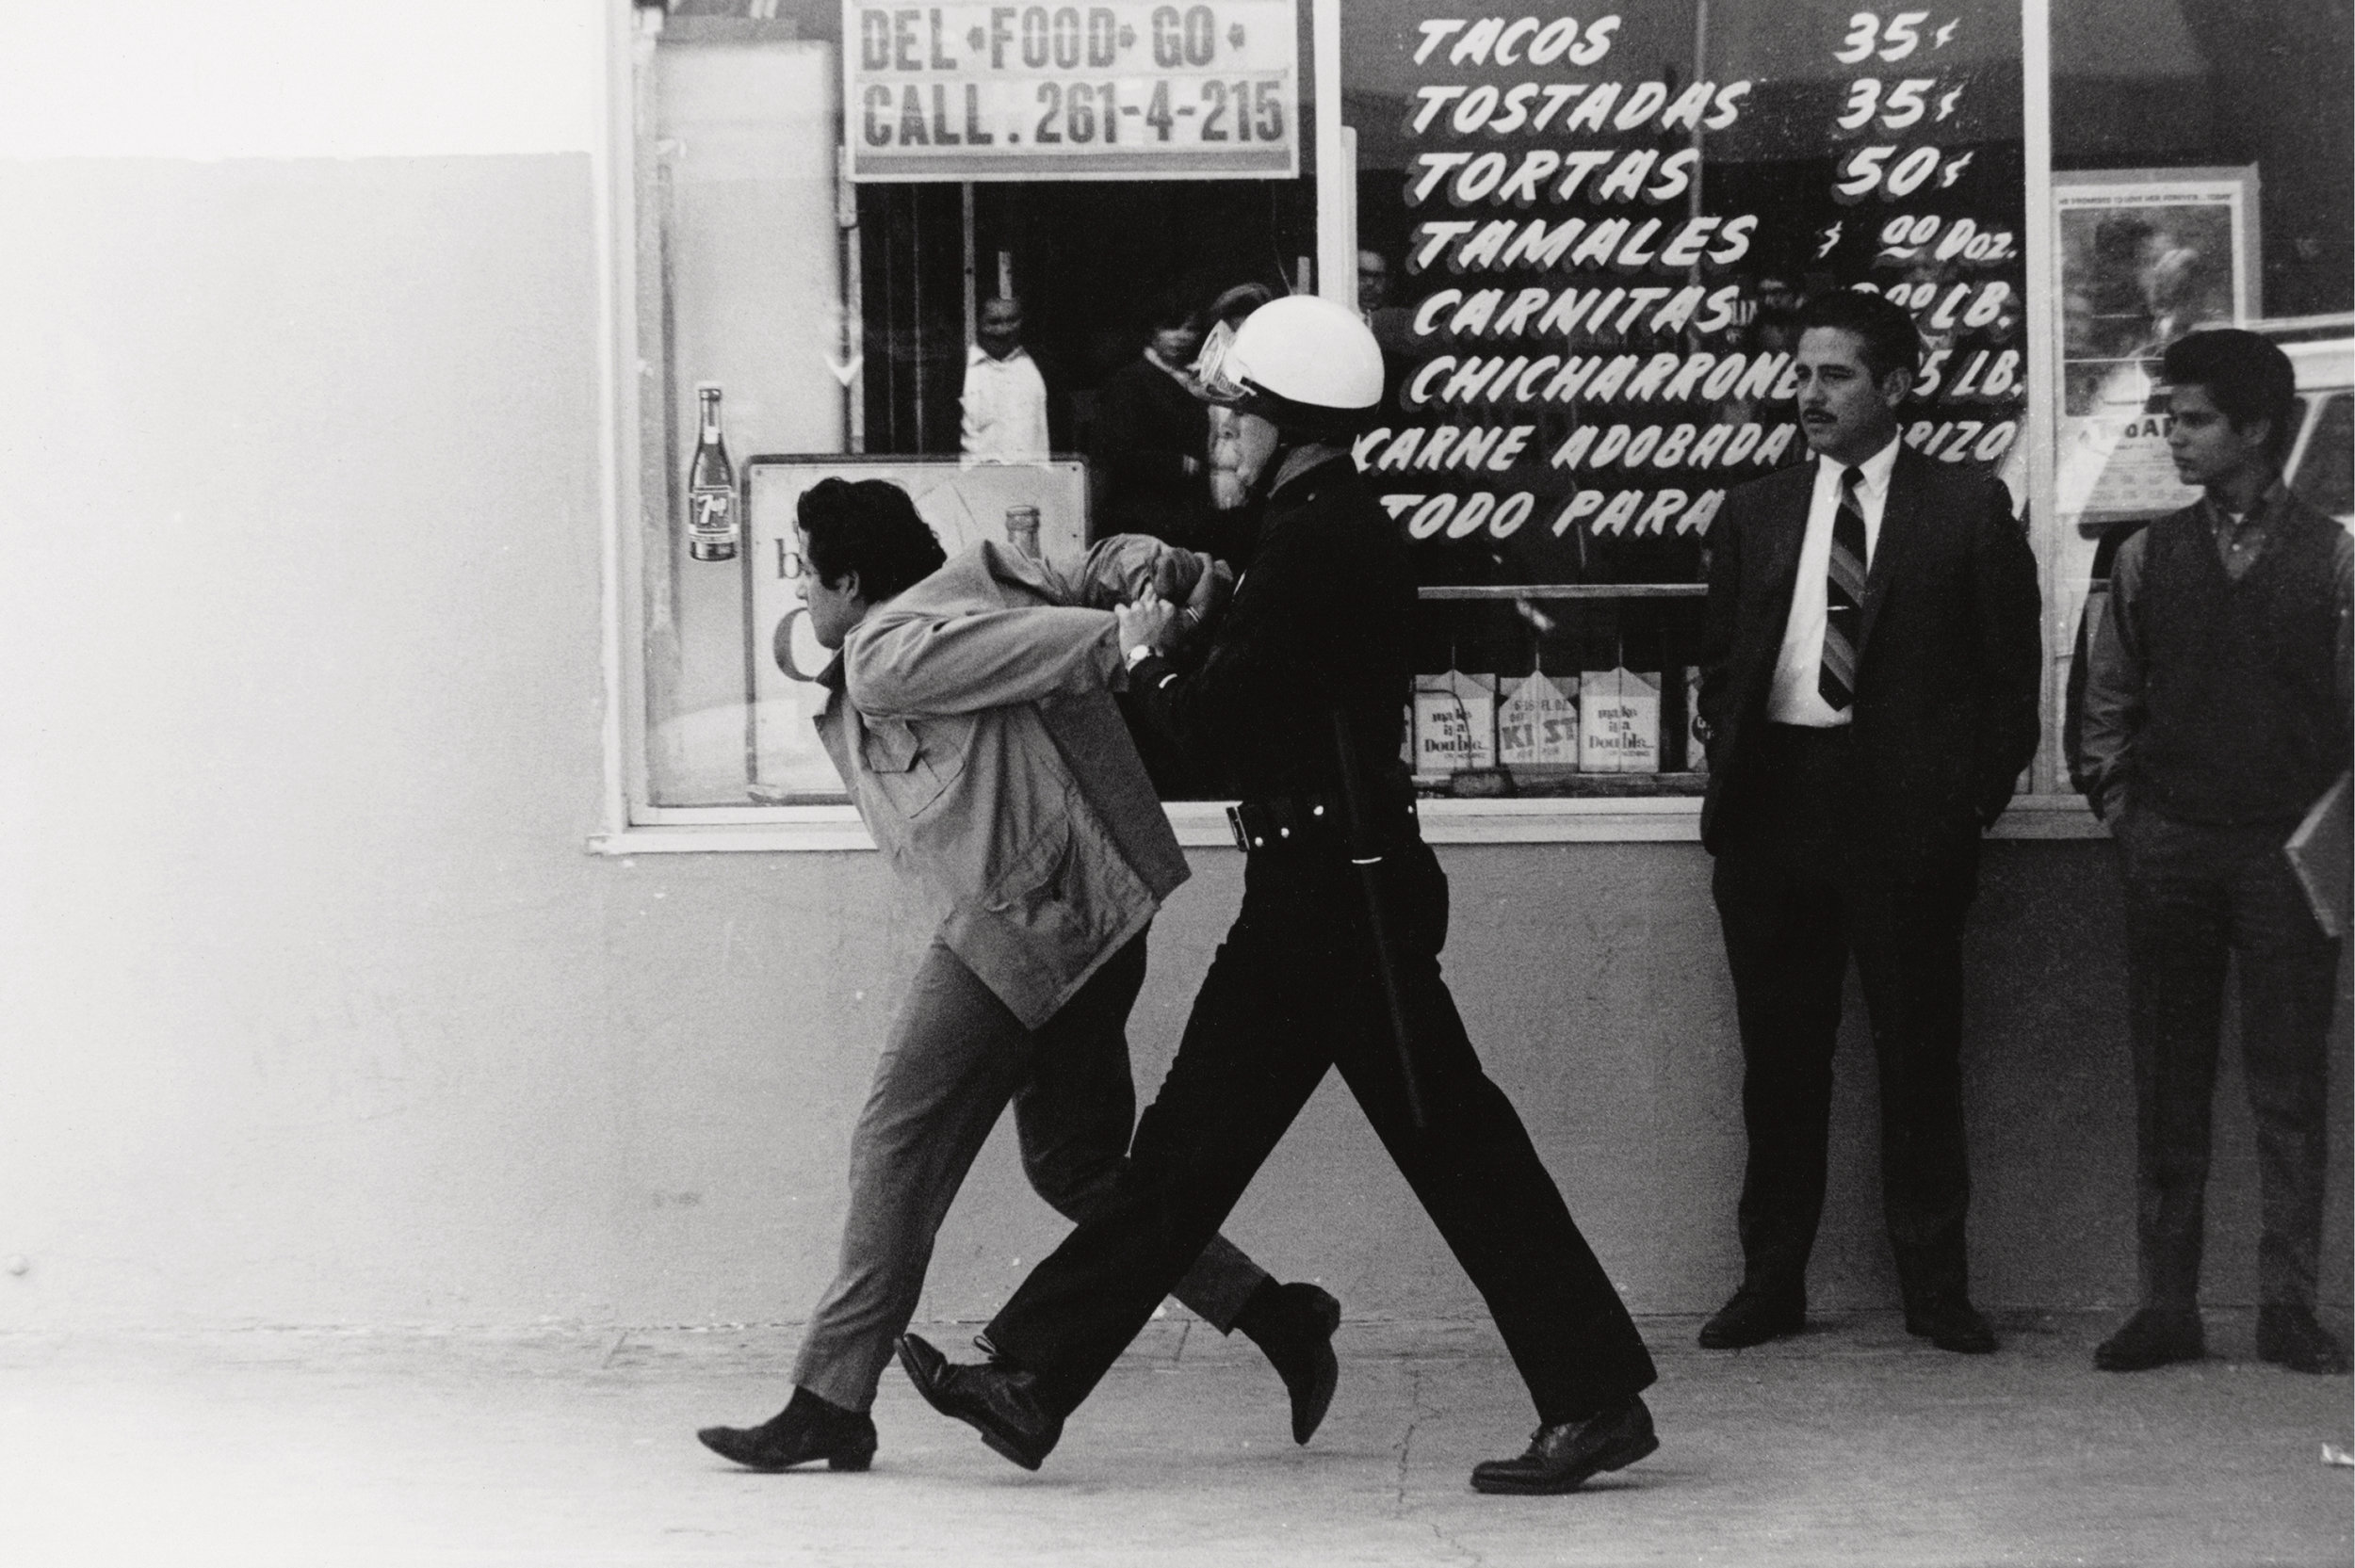 Los Angeles police arrest a Chicano student protester in the neighborhood of Boyle Heights in 1970. © George Rodriguez